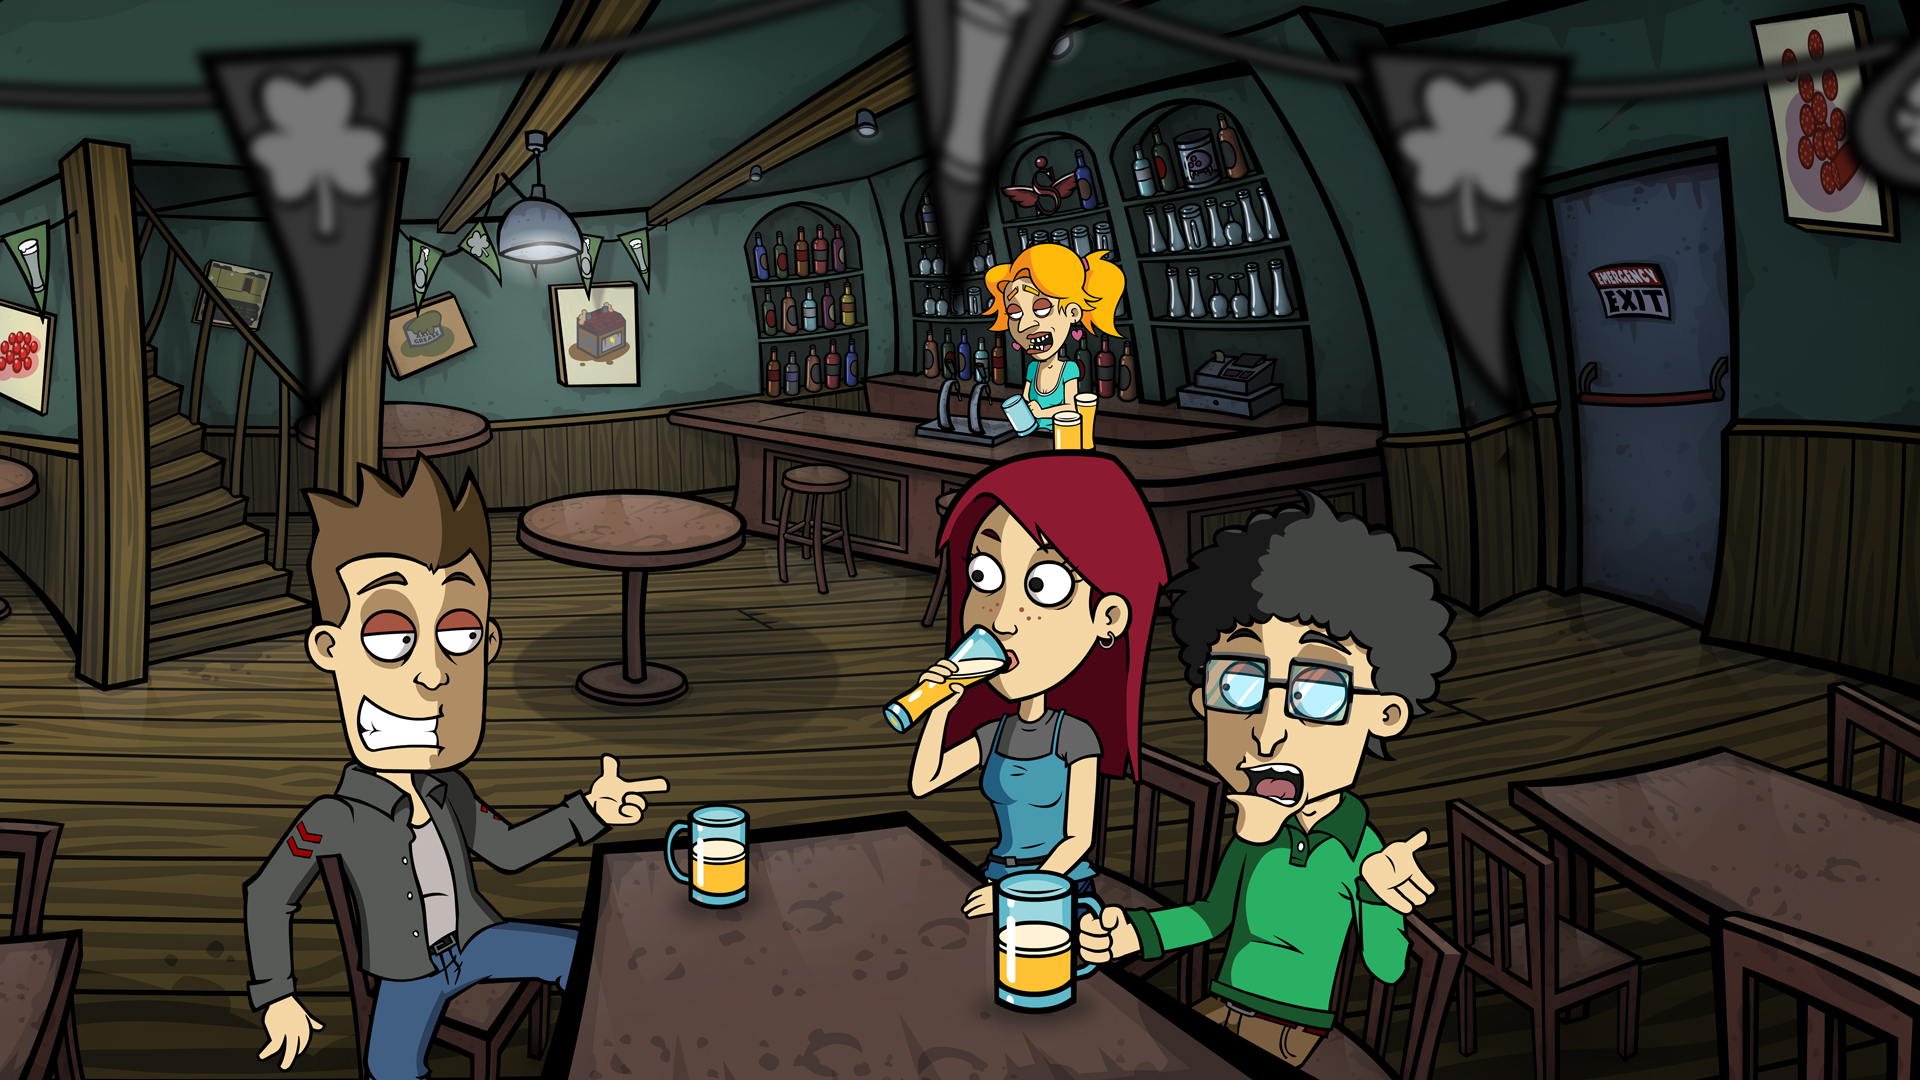 A feminine figure sits with two masculine figures in a bar while another feminine figure cleans glasses in the background.